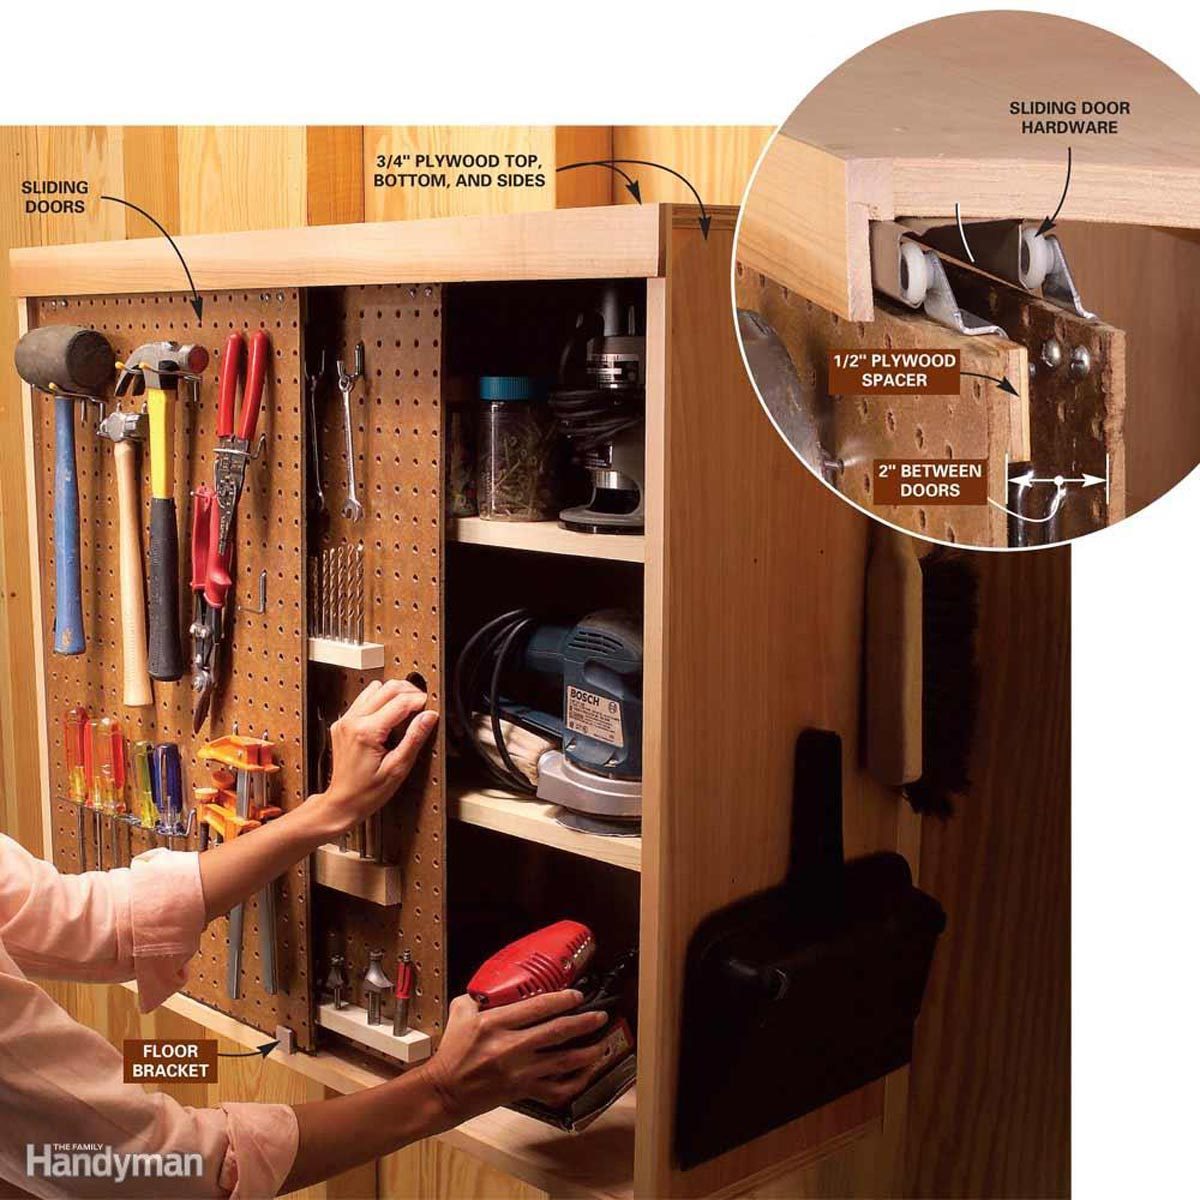 6 Storage Solutions You Can Build Into Any Cabinet